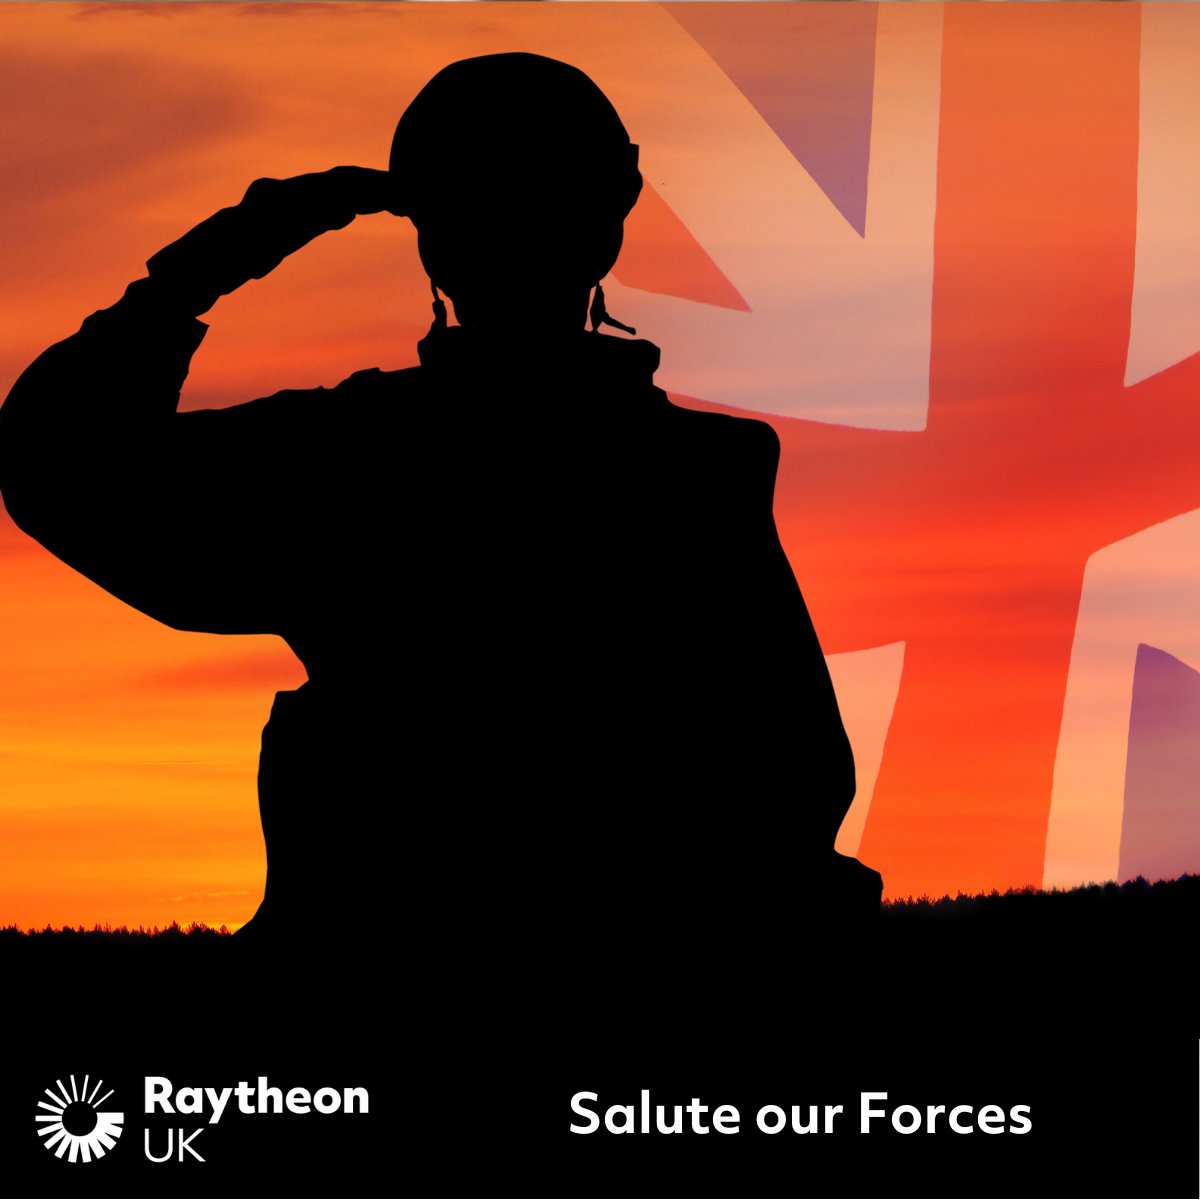 Today and every day, we honour our Armed Forces and extend our thanks and respect to serving personnel, veterans, military families and cadets. #ArmedForcesDay #SaluteOurForces